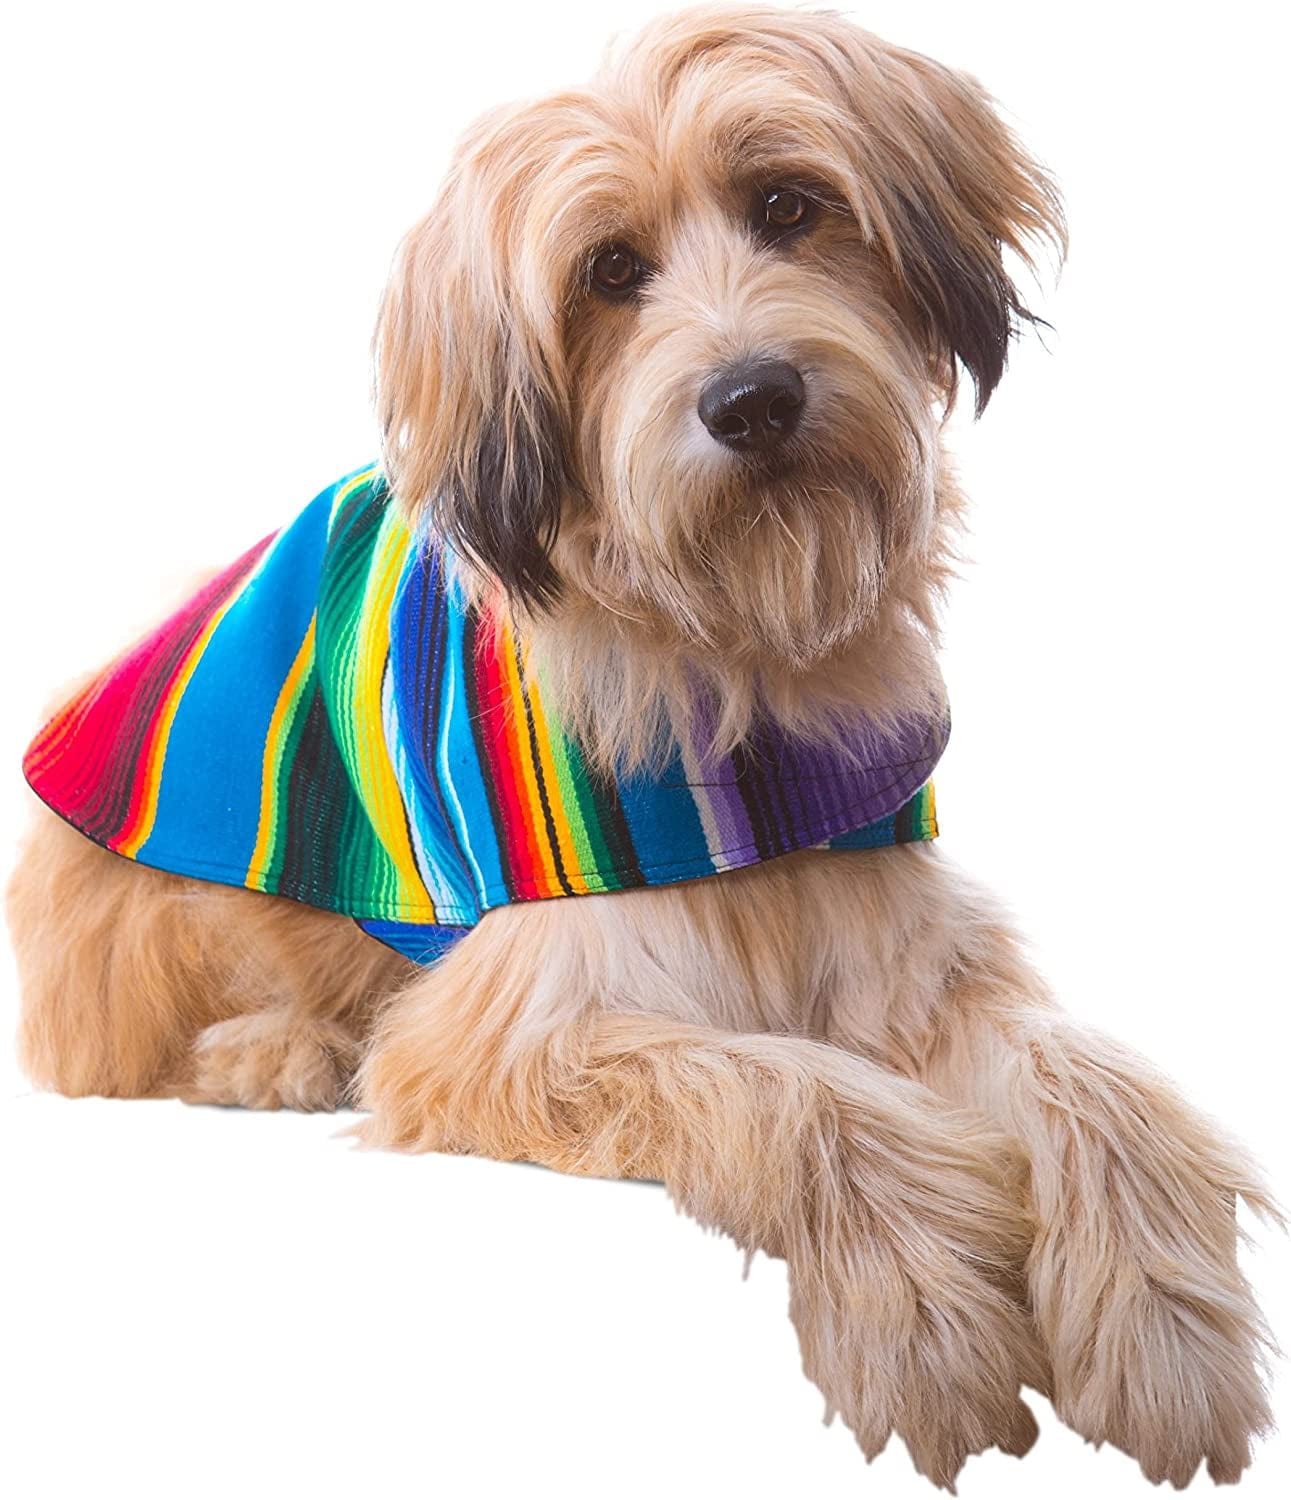 Dog Clothes - Handmade Dog Poncho - Cinco De Mayo Chihuahua Costume from Authentic Mexican Blanket (Blue, XXS) Animals & Pet Supplies > Pet Supplies > Dog Supplies > Dog Apparel Baja Ponchos   